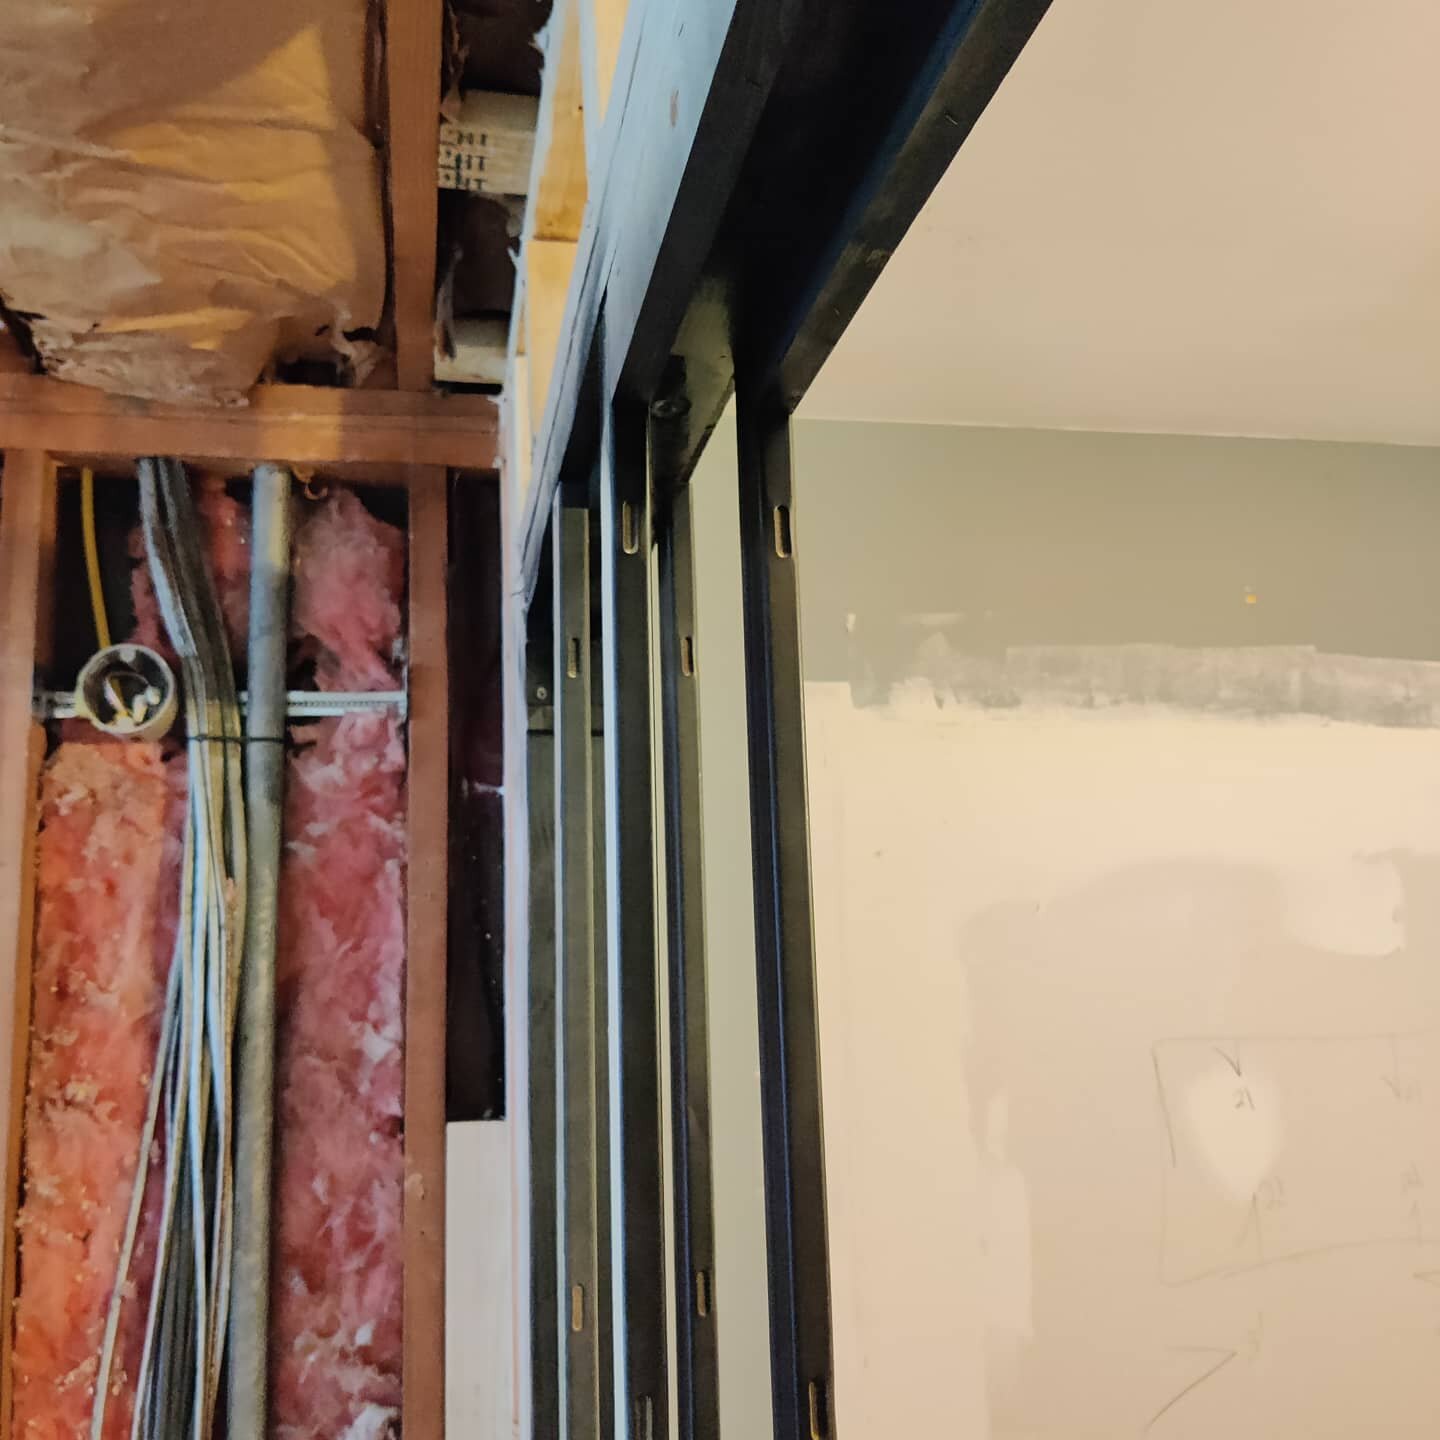 We paint our pocket door jambs and slots too before we hang drywall. That little detail that other trades look at you like you're wasting your time on 🤔🤙

#homeremodeling #remodeledbathroom #remodeler #houseremodel #bathroomremodel #omaharealestate